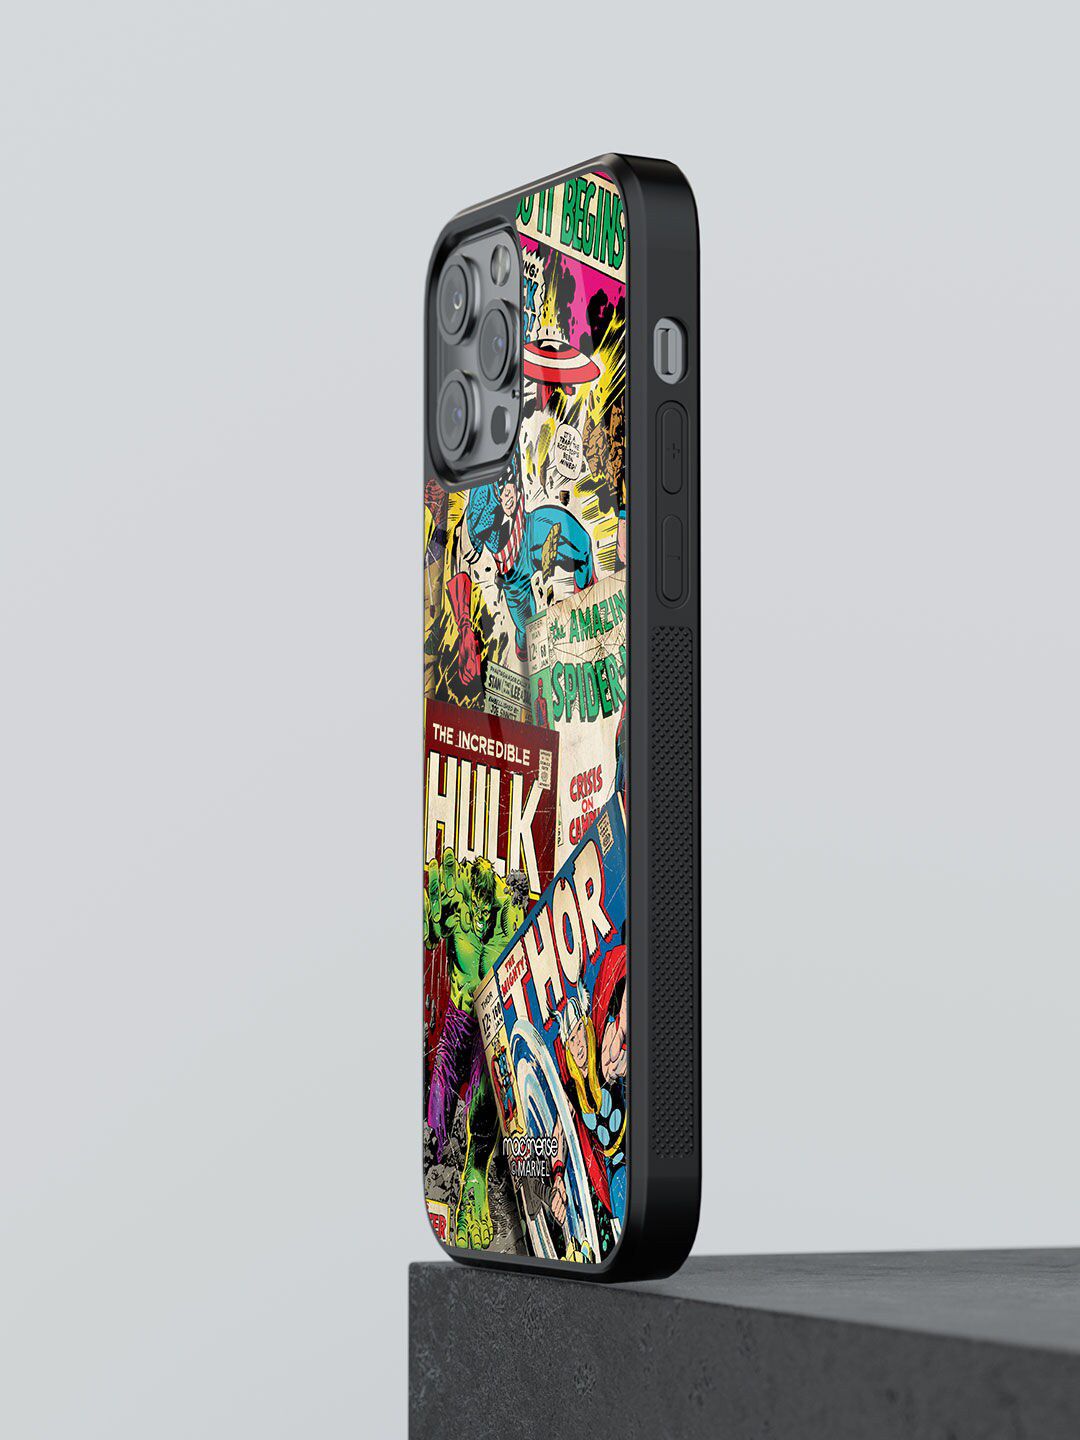 macmerise Printed Marvel Comics Collection Glass iPhone 12 Pro Max Back Case Price in India